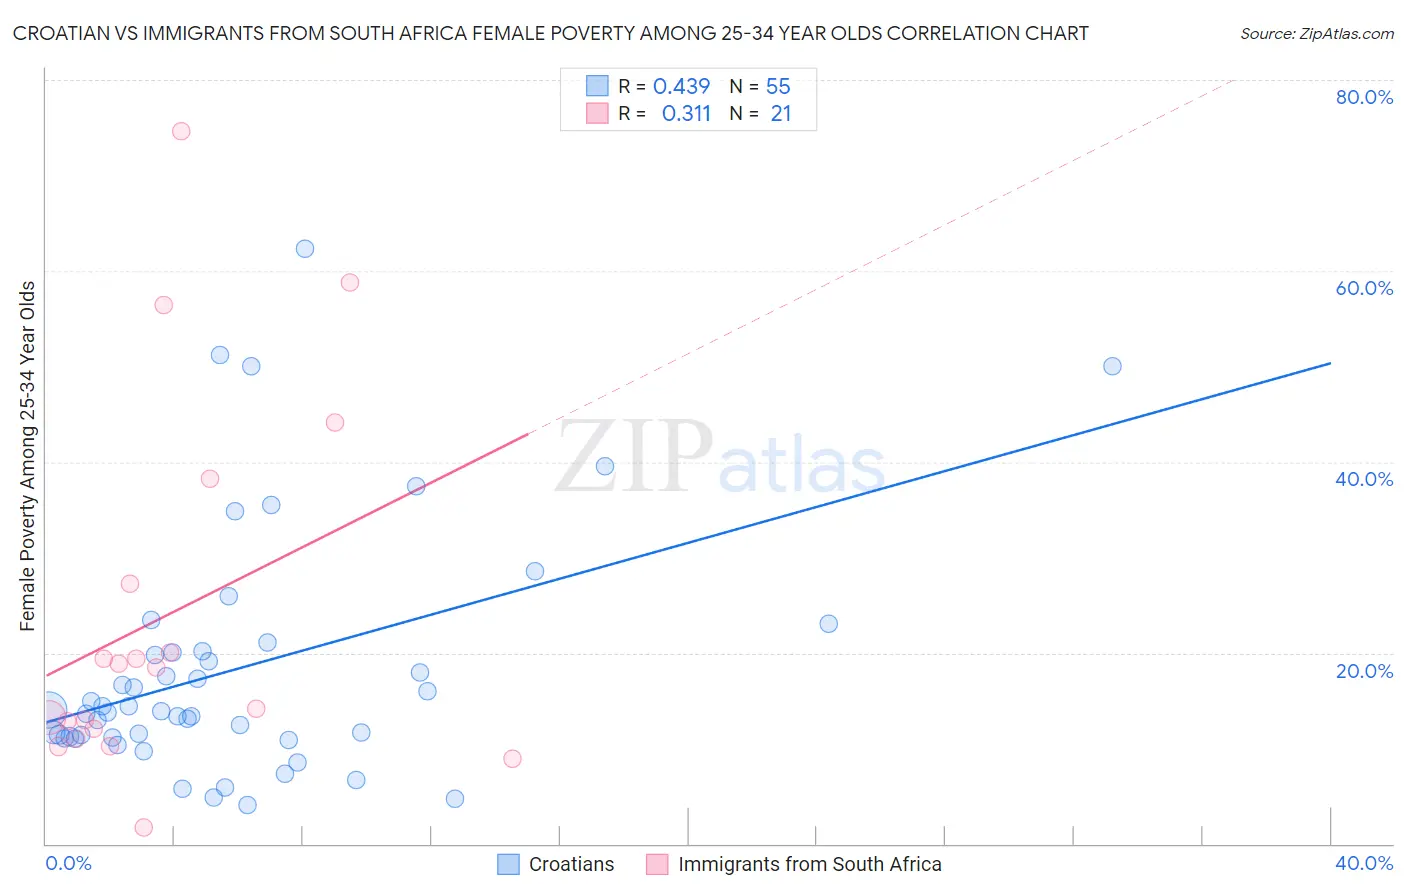 Croatian vs Immigrants from South Africa Female Poverty Among 25-34 Year Olds